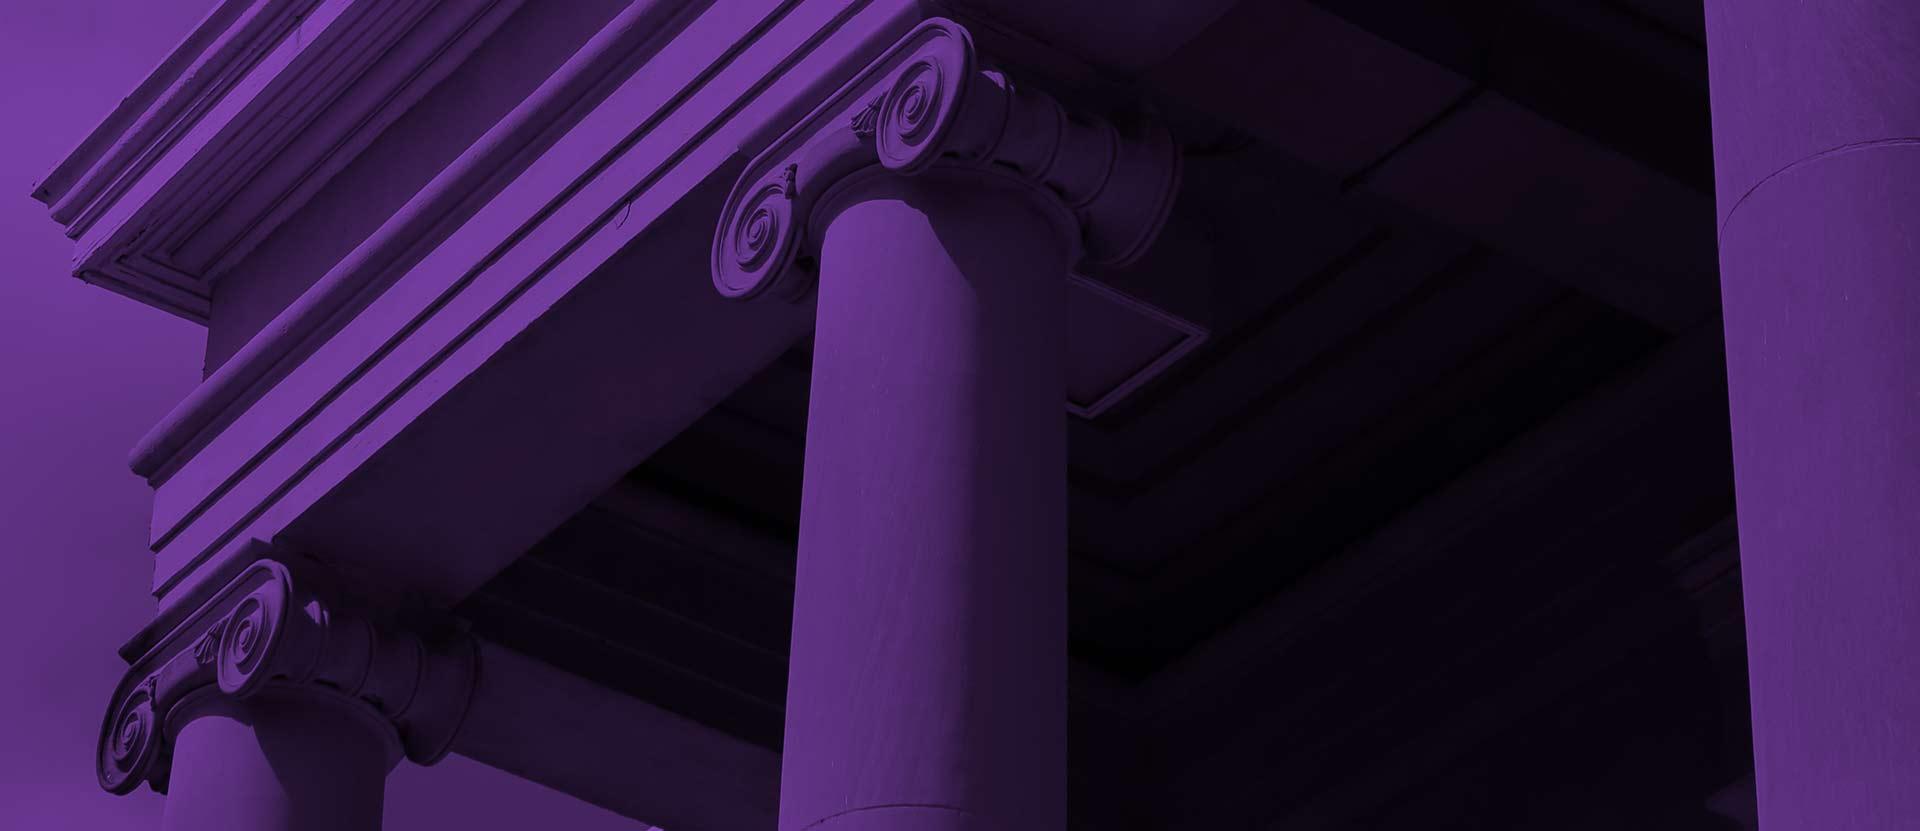 Columns of Candler building with purple overlay.